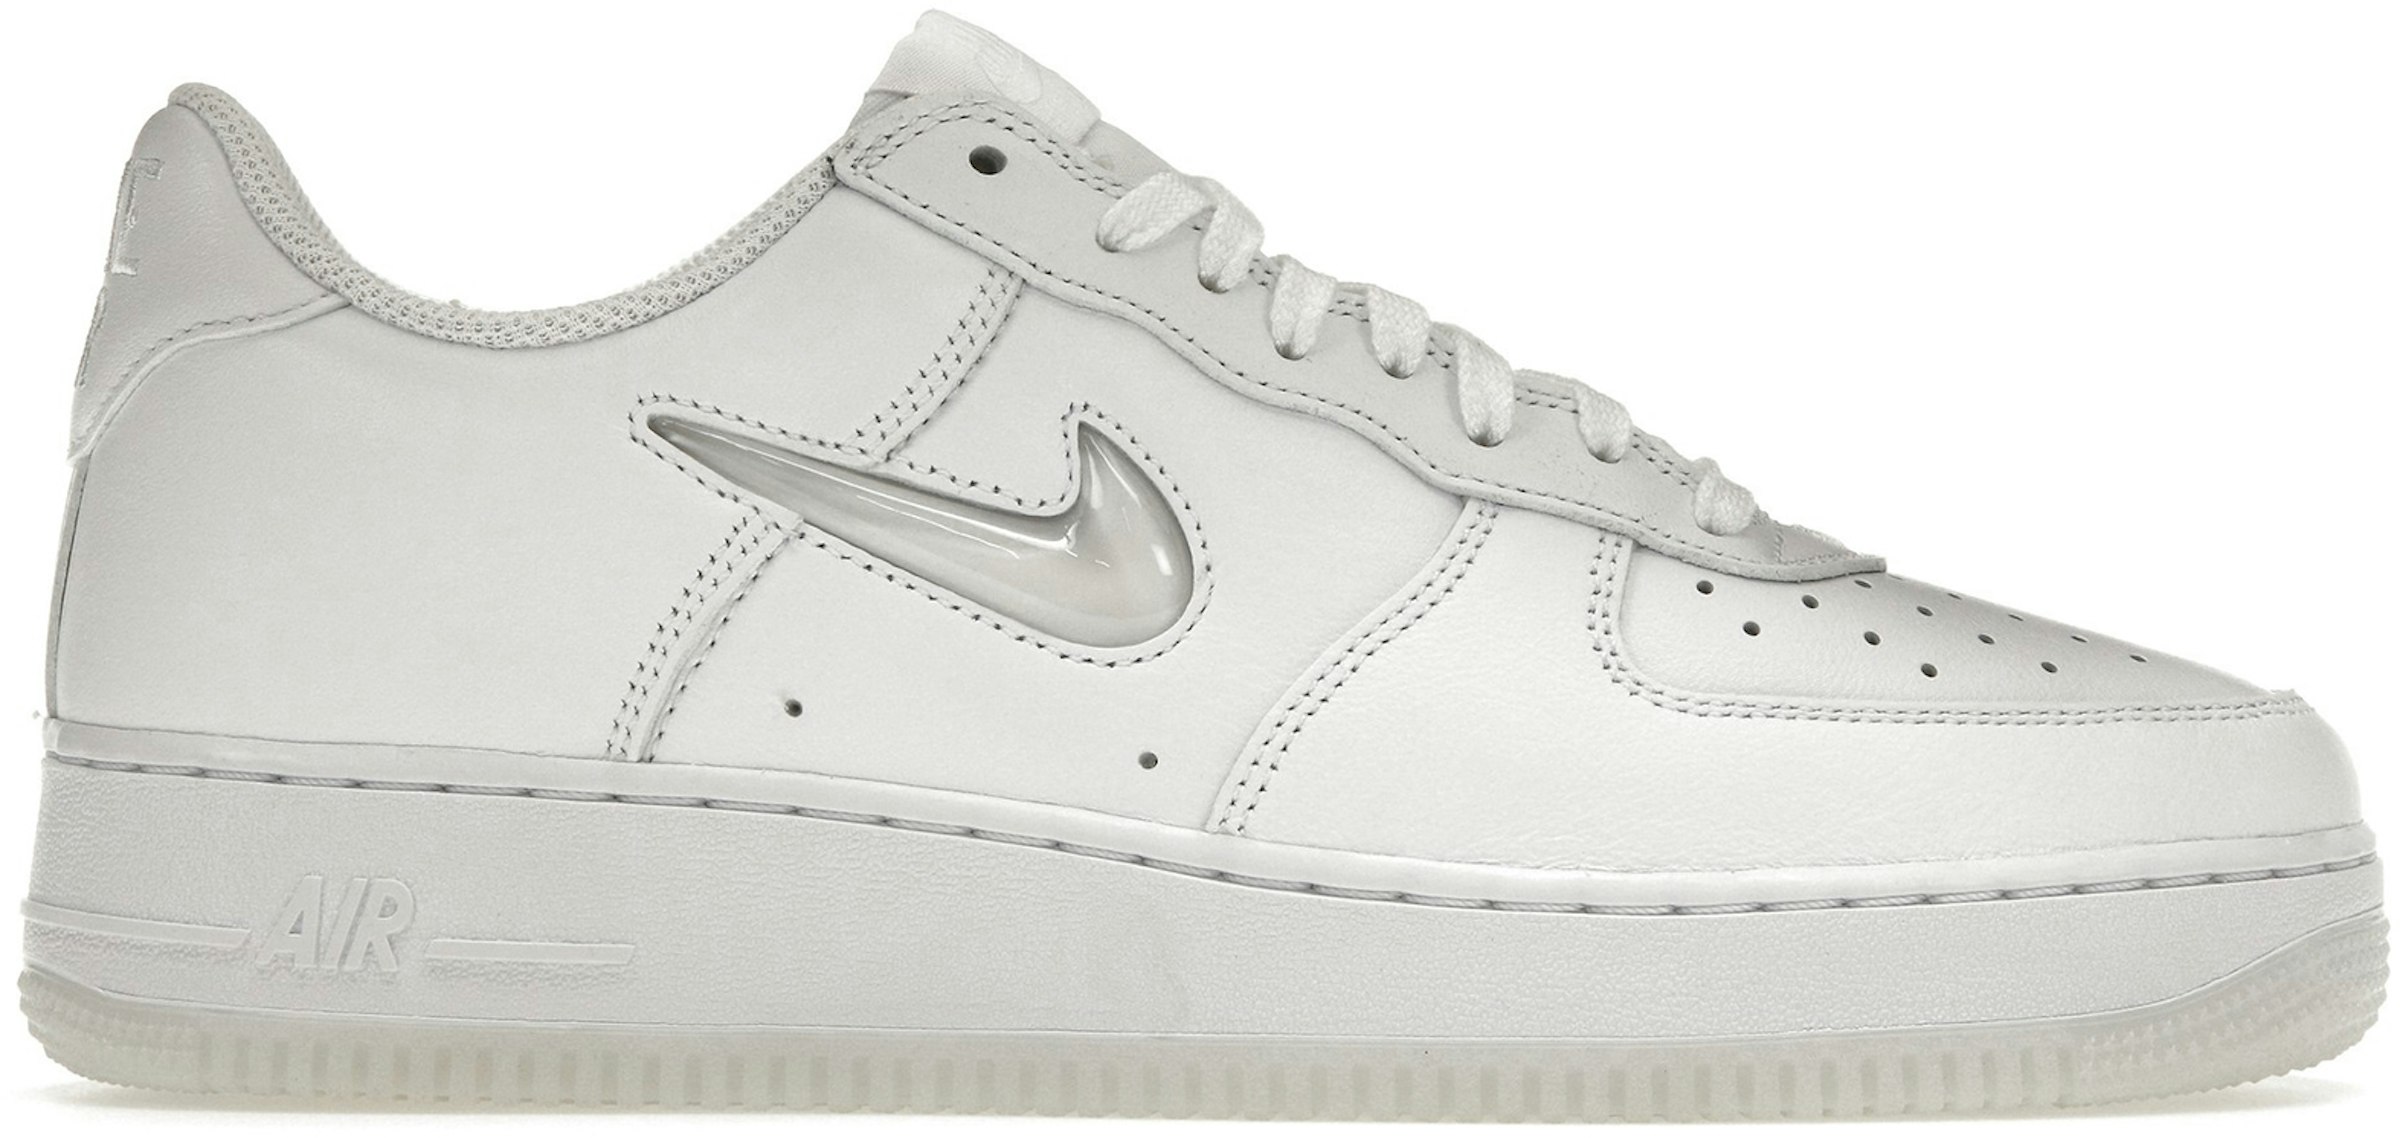 Air Force 1 Low '07 Retro Color of the Month Jewel Triple White Men's - FN5924-100 US